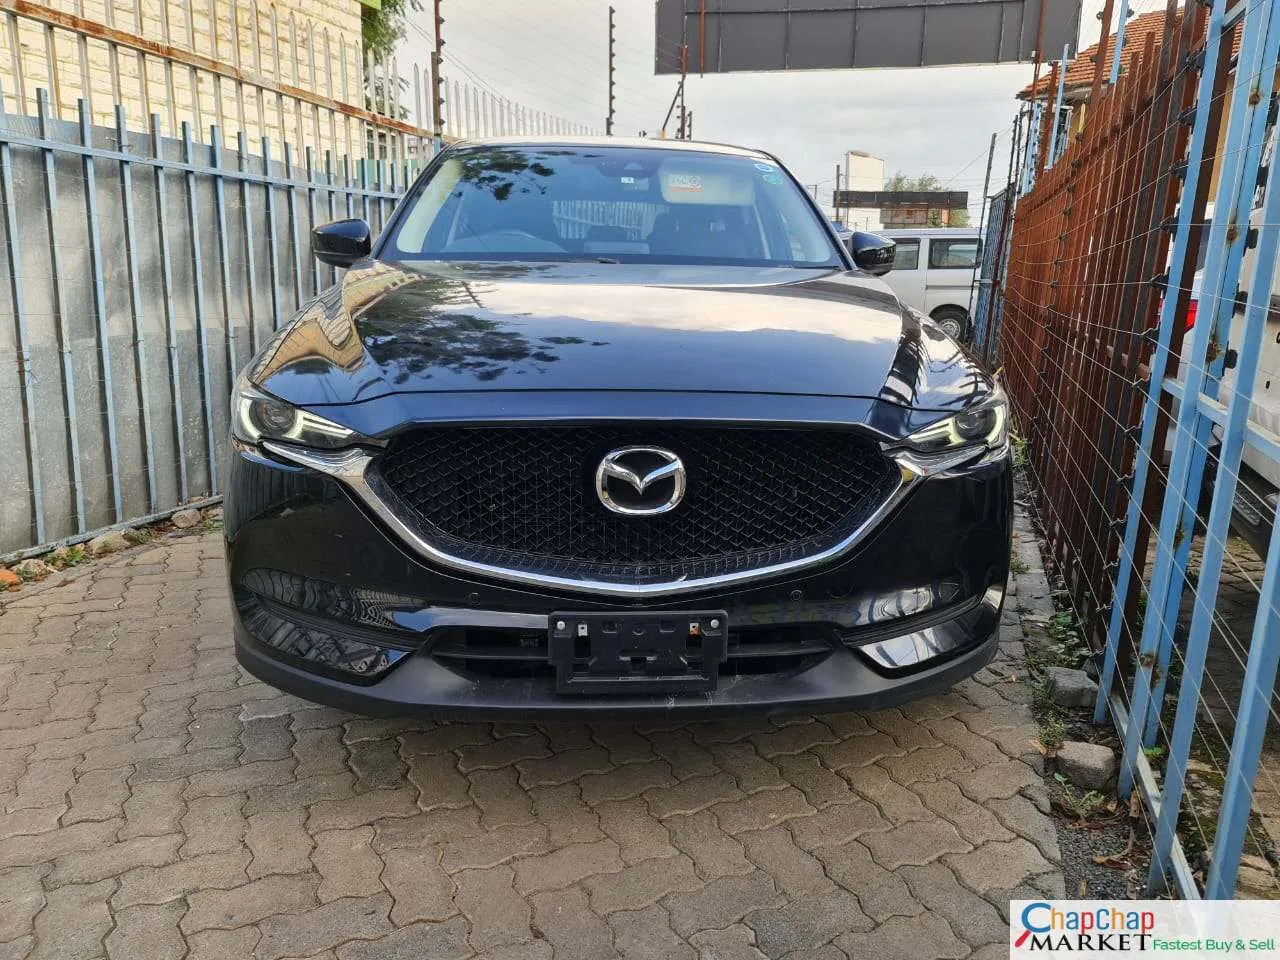 Mazda CX-5 2017 PETROL 🔥 You Pay 20% DEPOSIT TRADE IN OK EXCLUSIVE